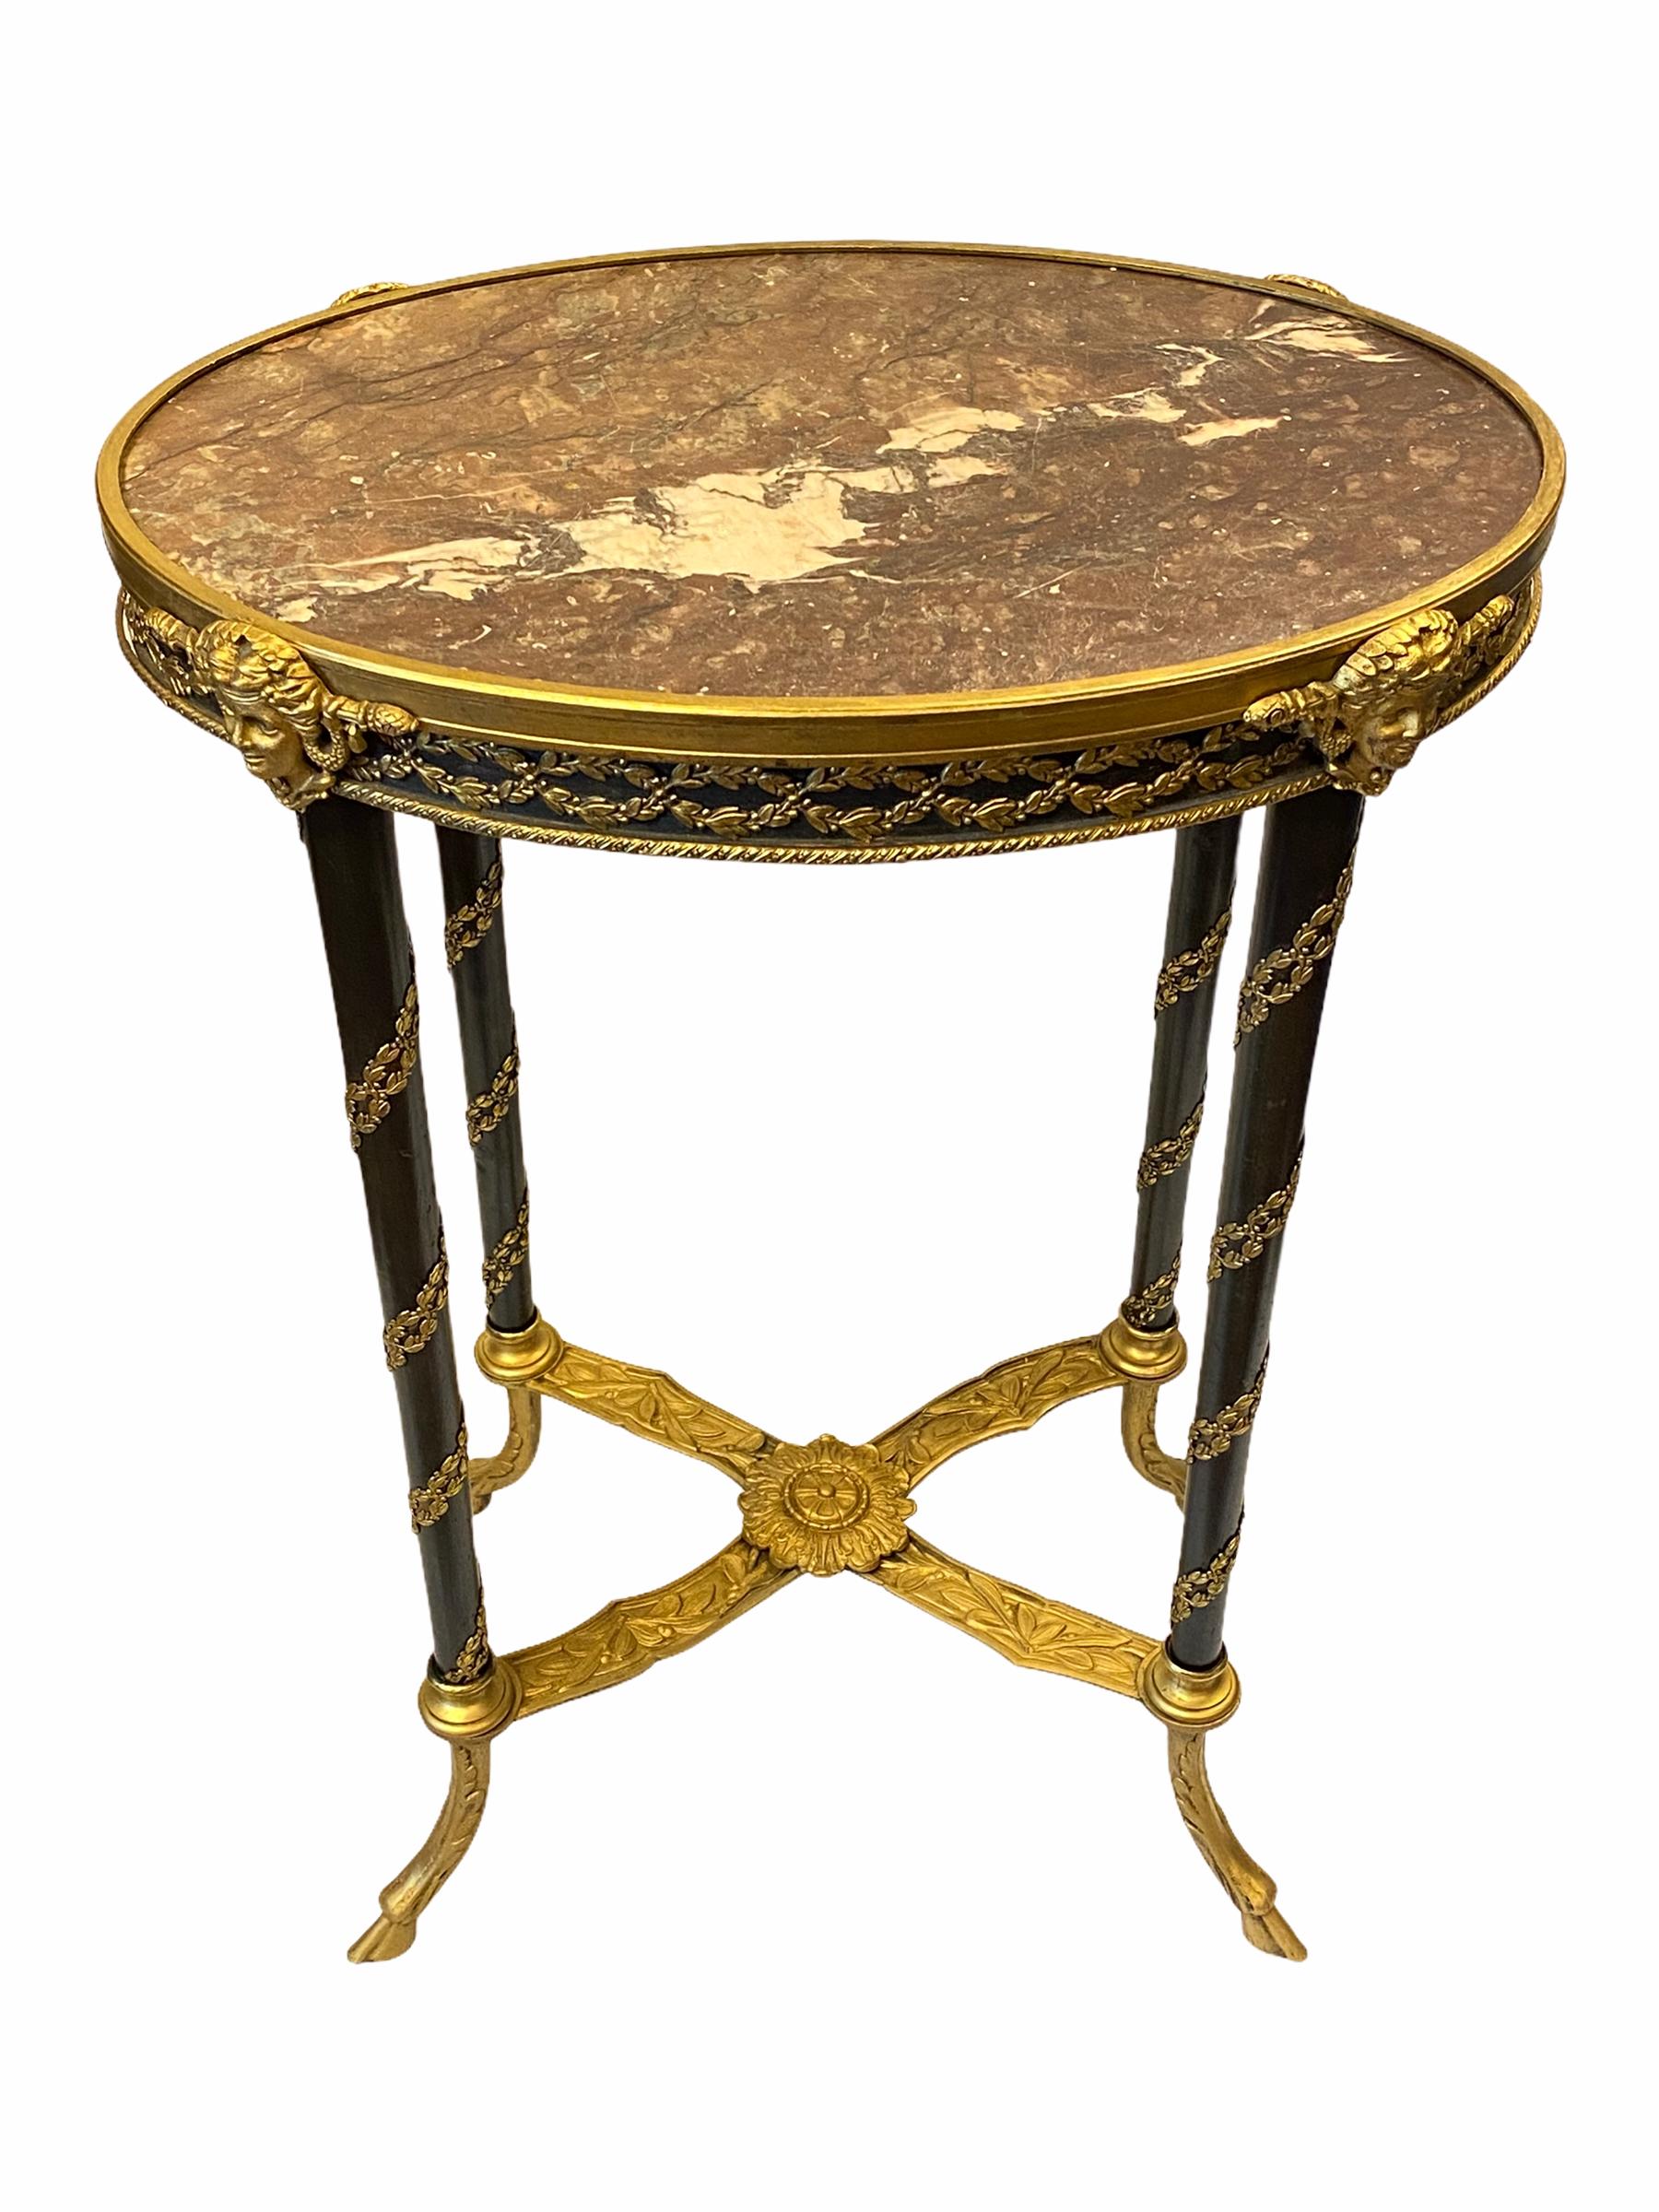 Carved Gilt Bronze and Marble Side Table in Louis XVI Style For Sale